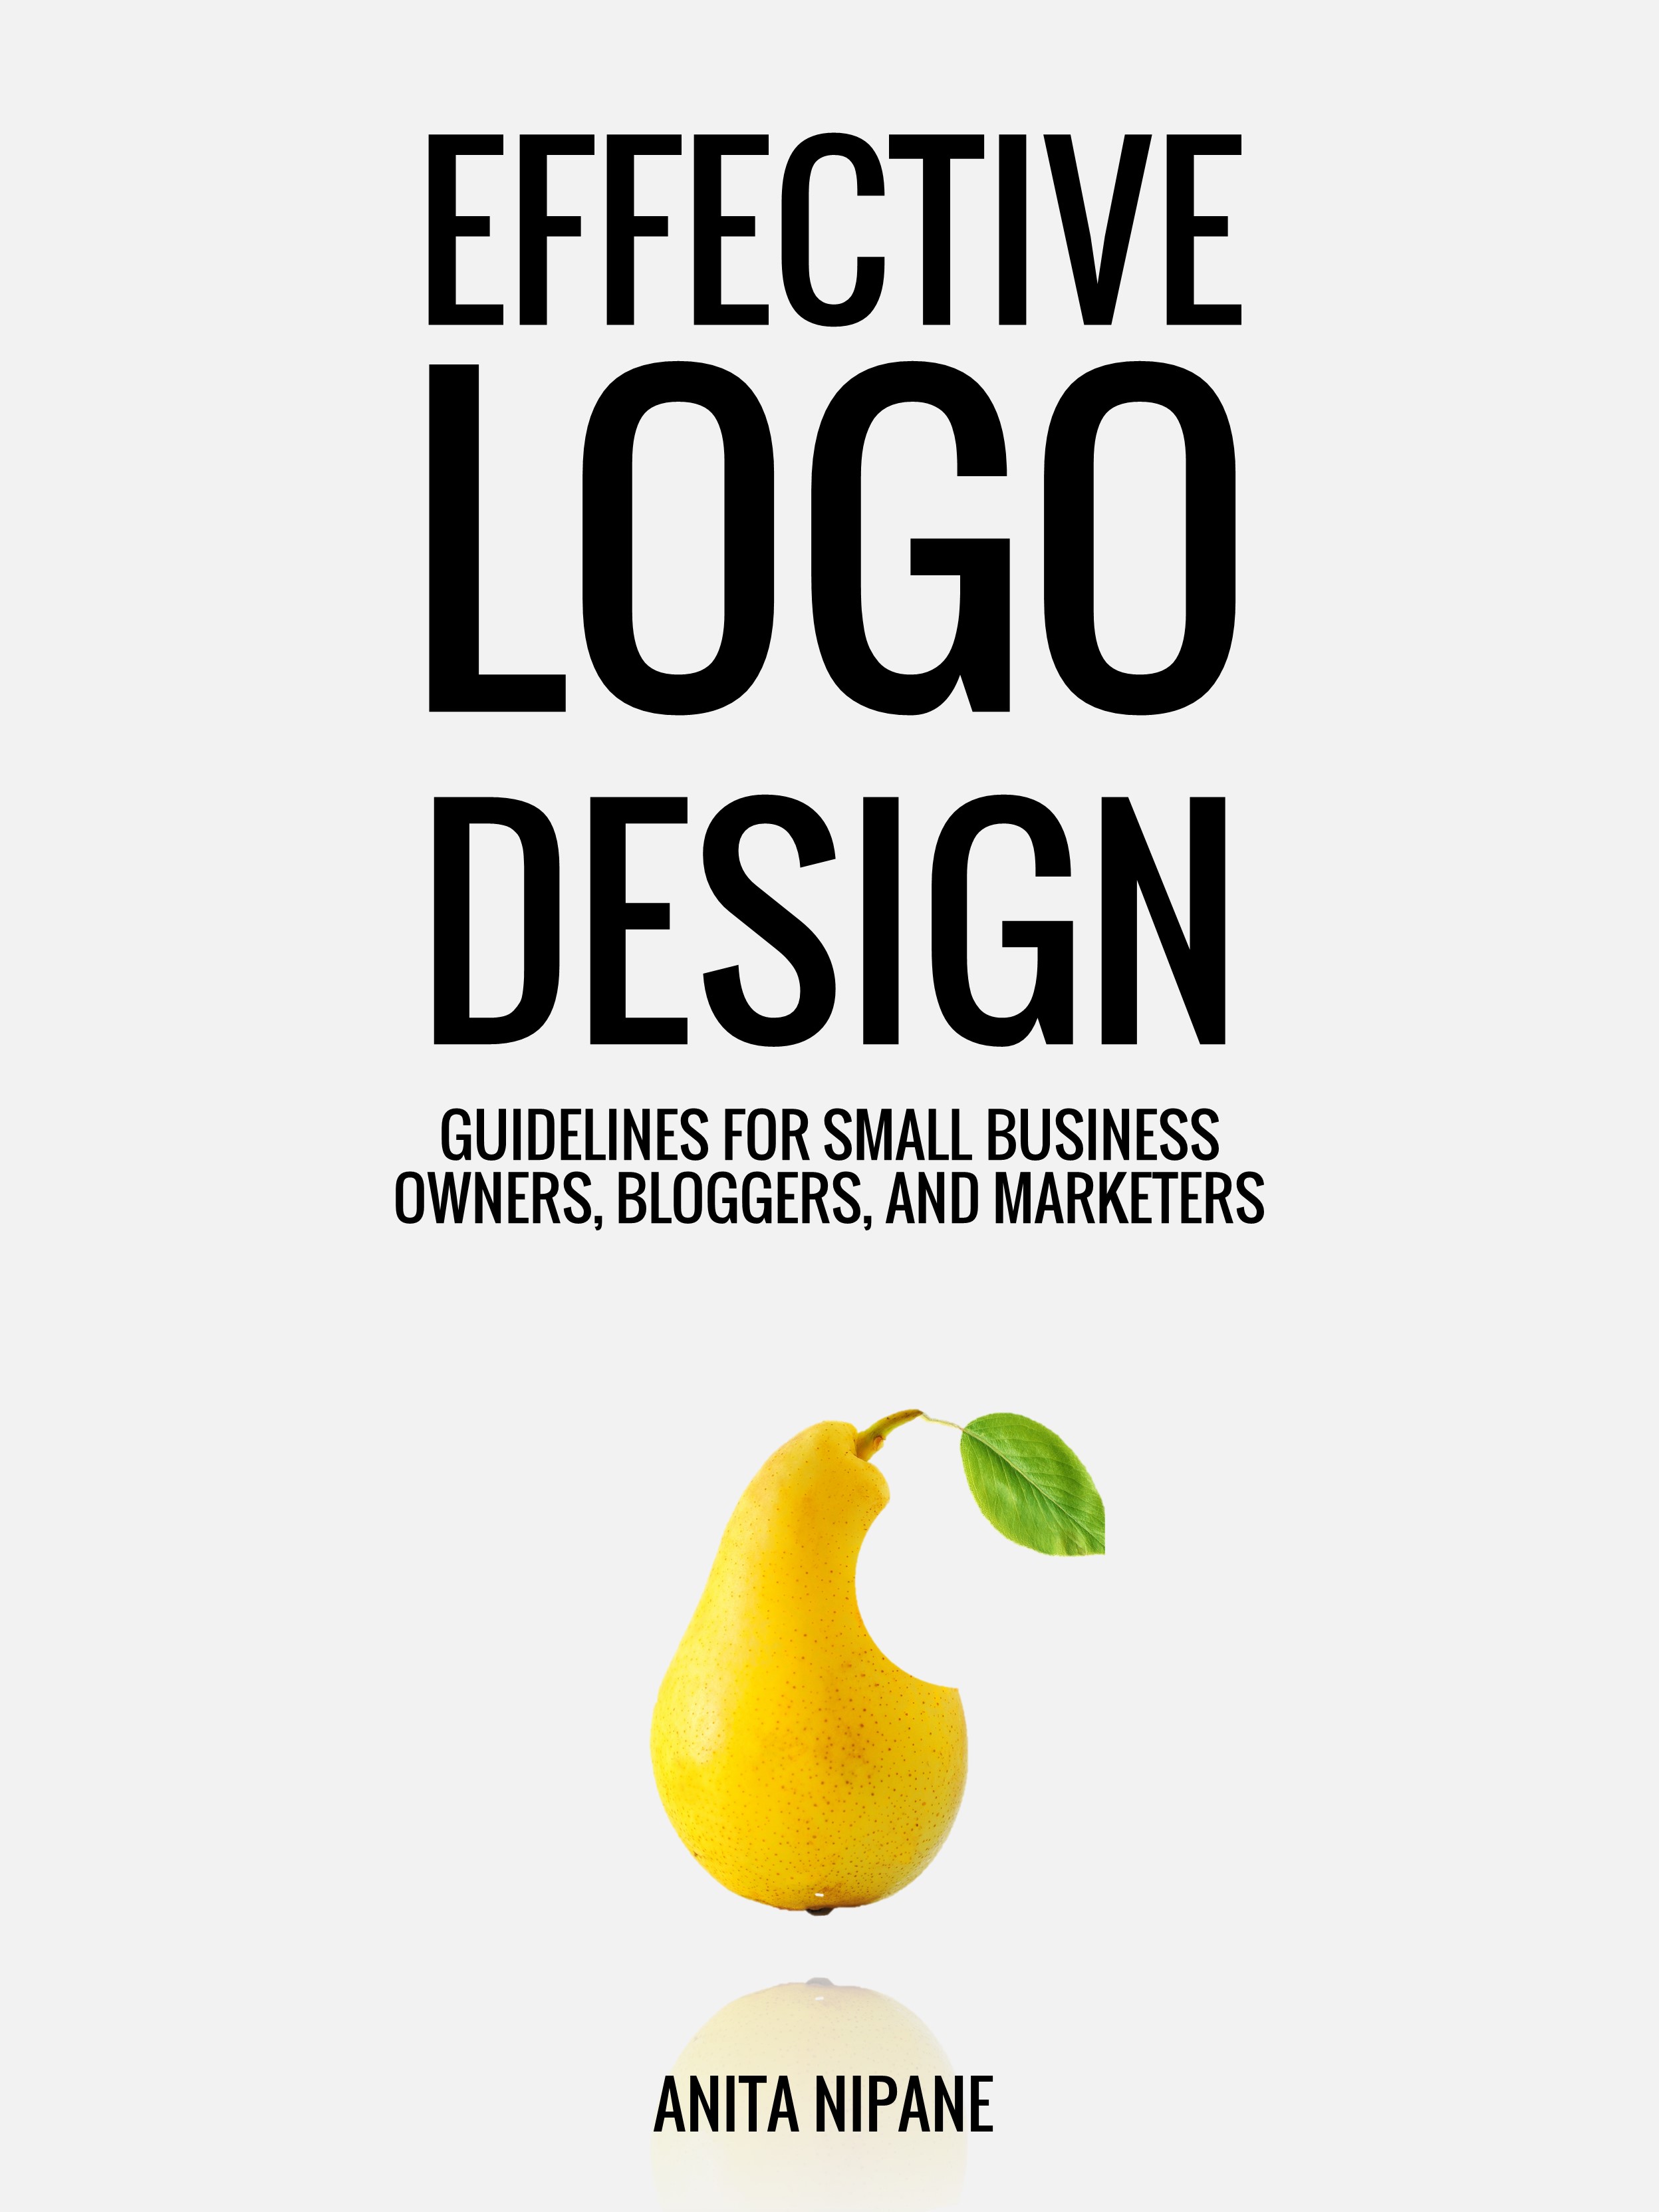 FREE: Effective Logo Design: Guidelines for Small Business Owners, Bloggers, and Marketers by Anita Nipane